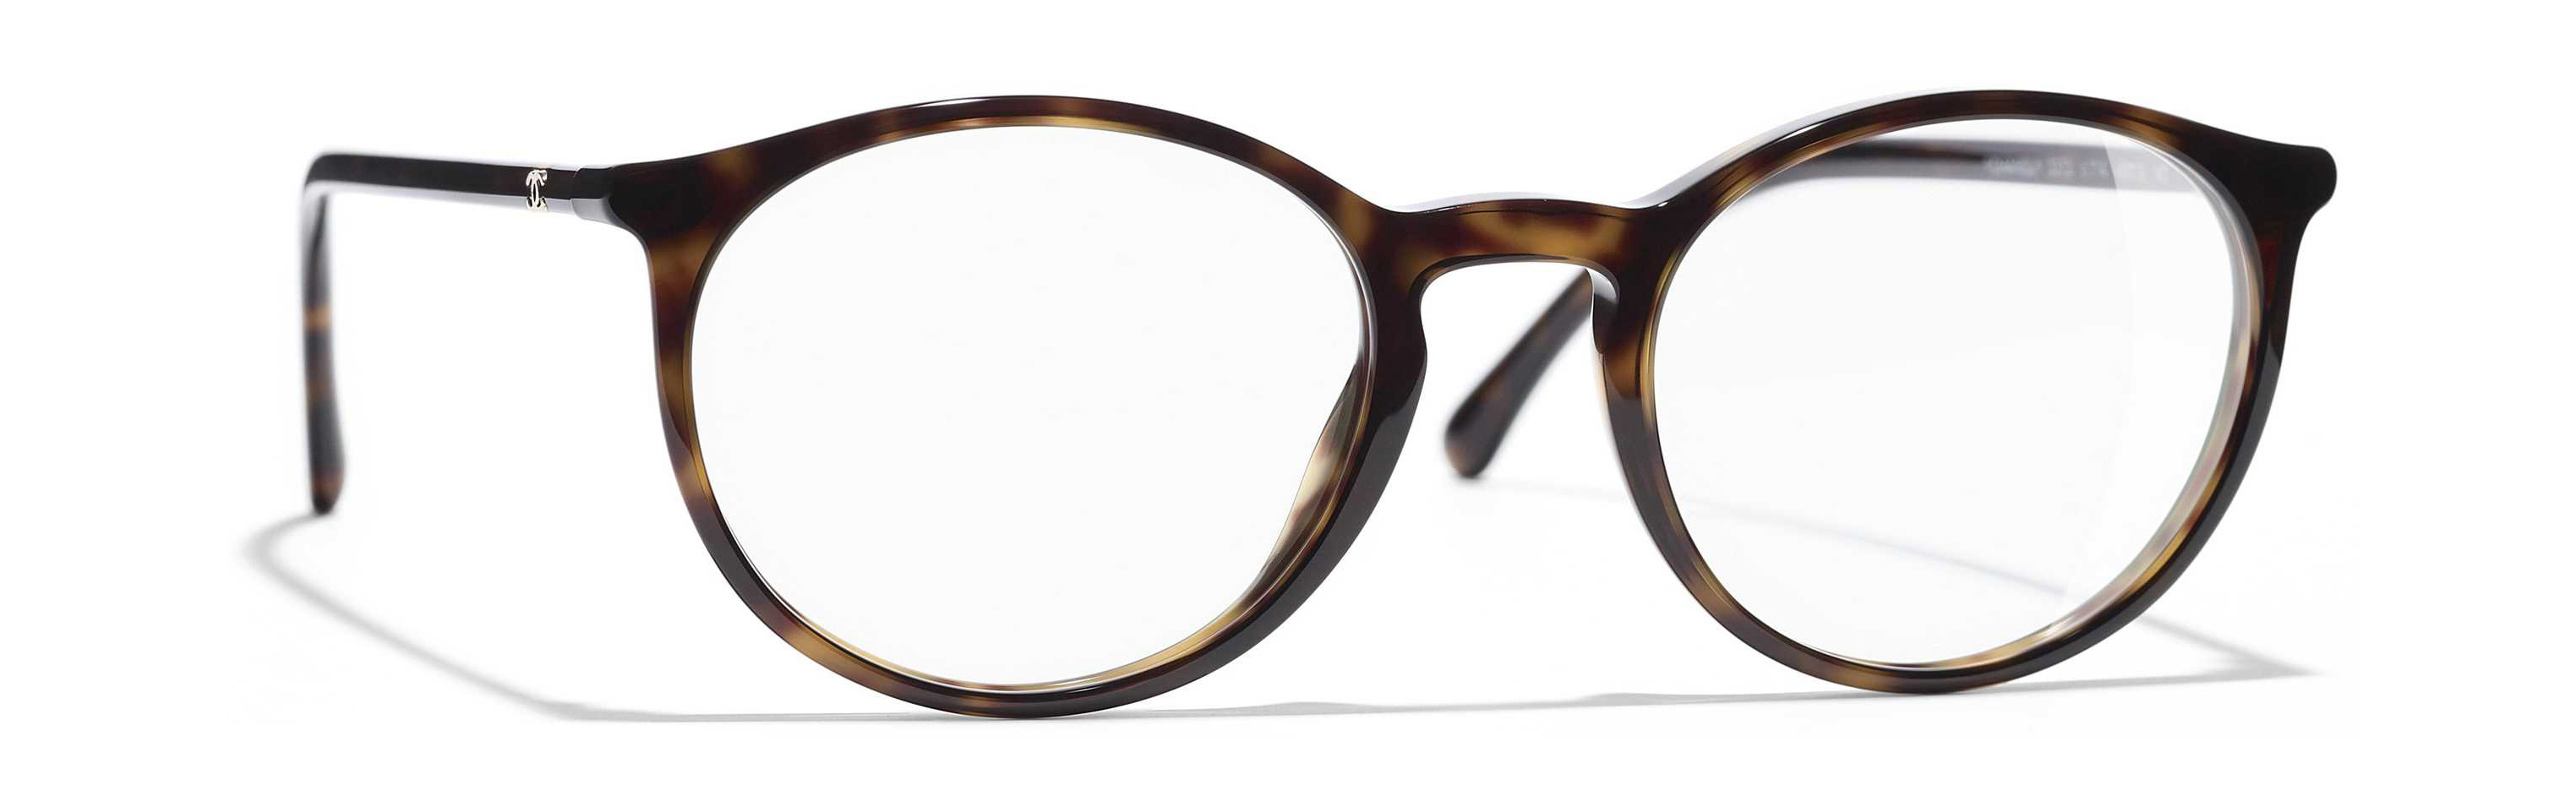 Eyeglasses of type Full Frame Glasses, CHANEL Home delivery at the